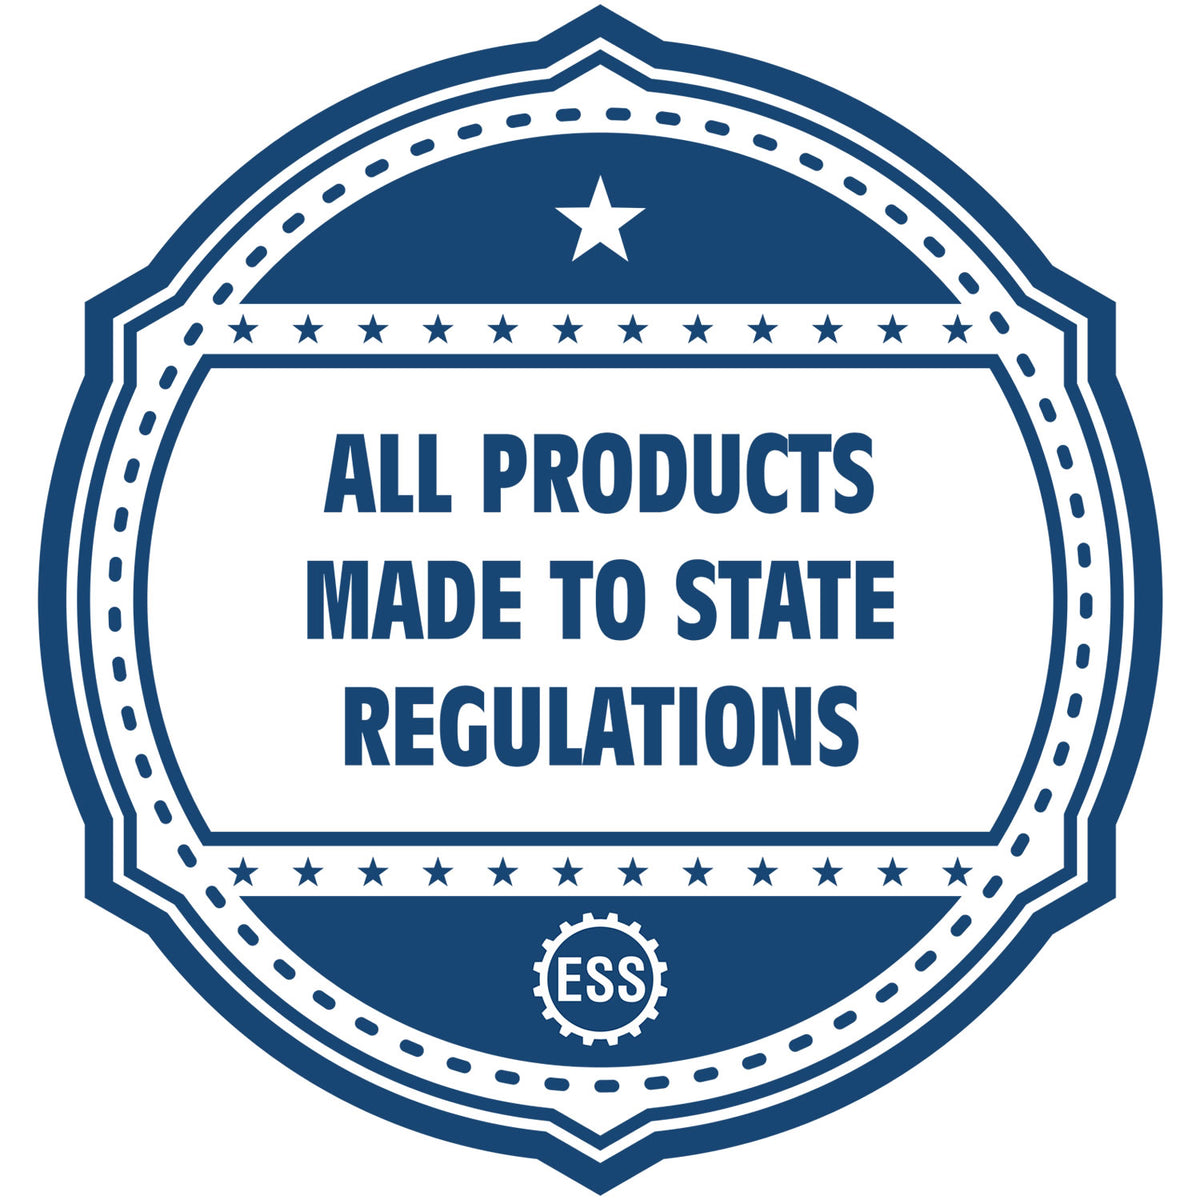 An icon or badge element for the State of Hawaii Architectural Seal Embosser showing that this product is made in compliance with state regulations.